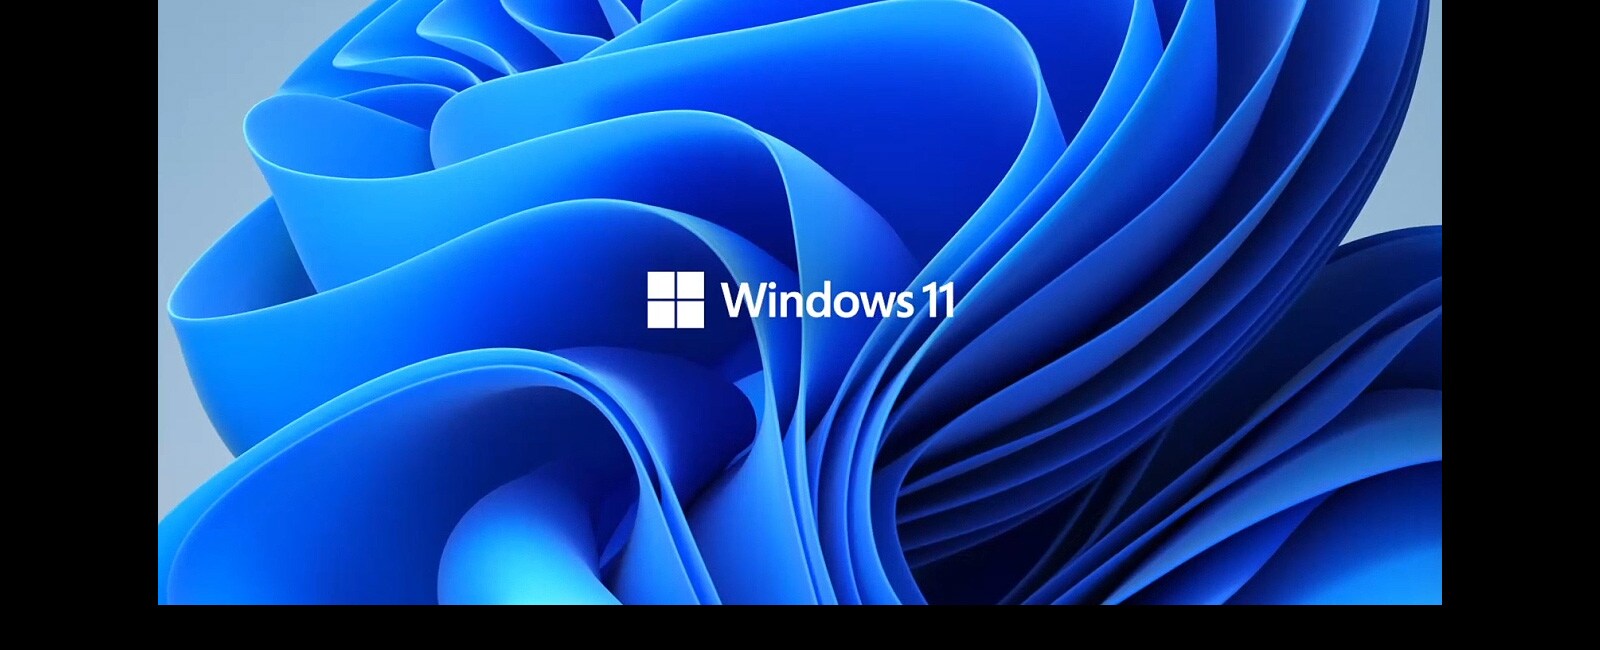 It shows the Windows11 logo and background image.